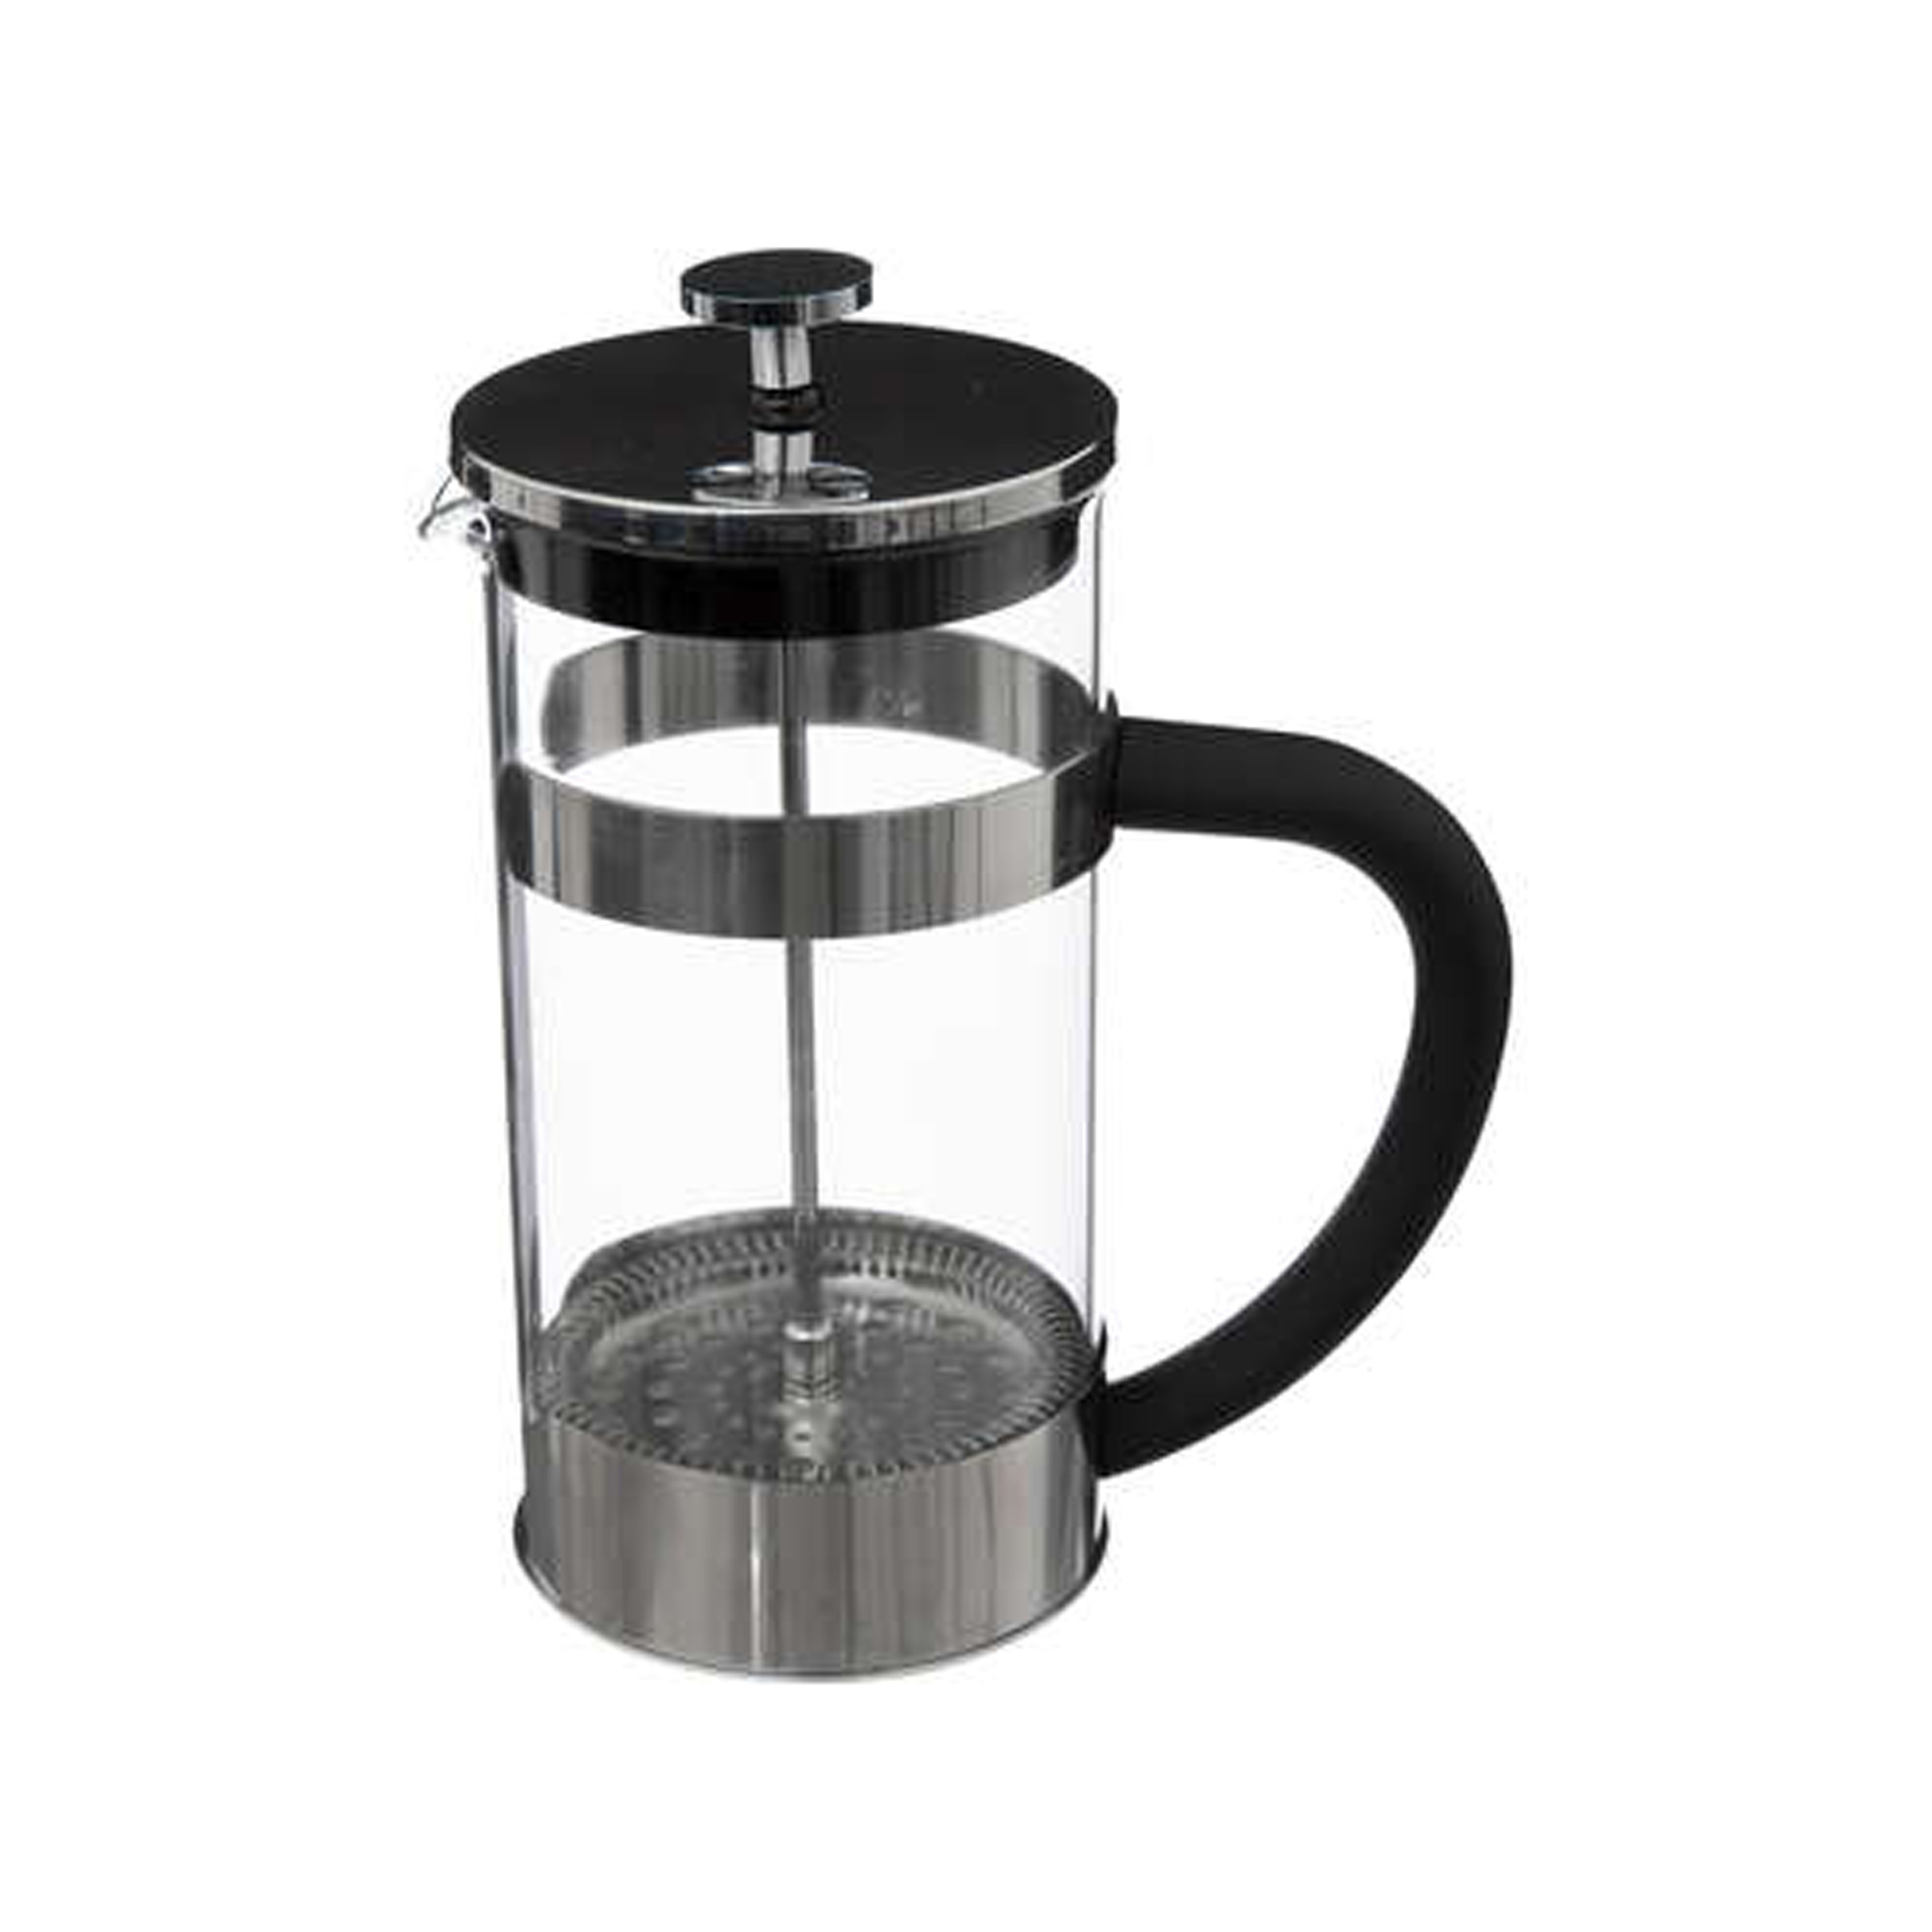 Cafetiere French Press koffiezetter koffiemaker pers 1000 ml glas-rvs